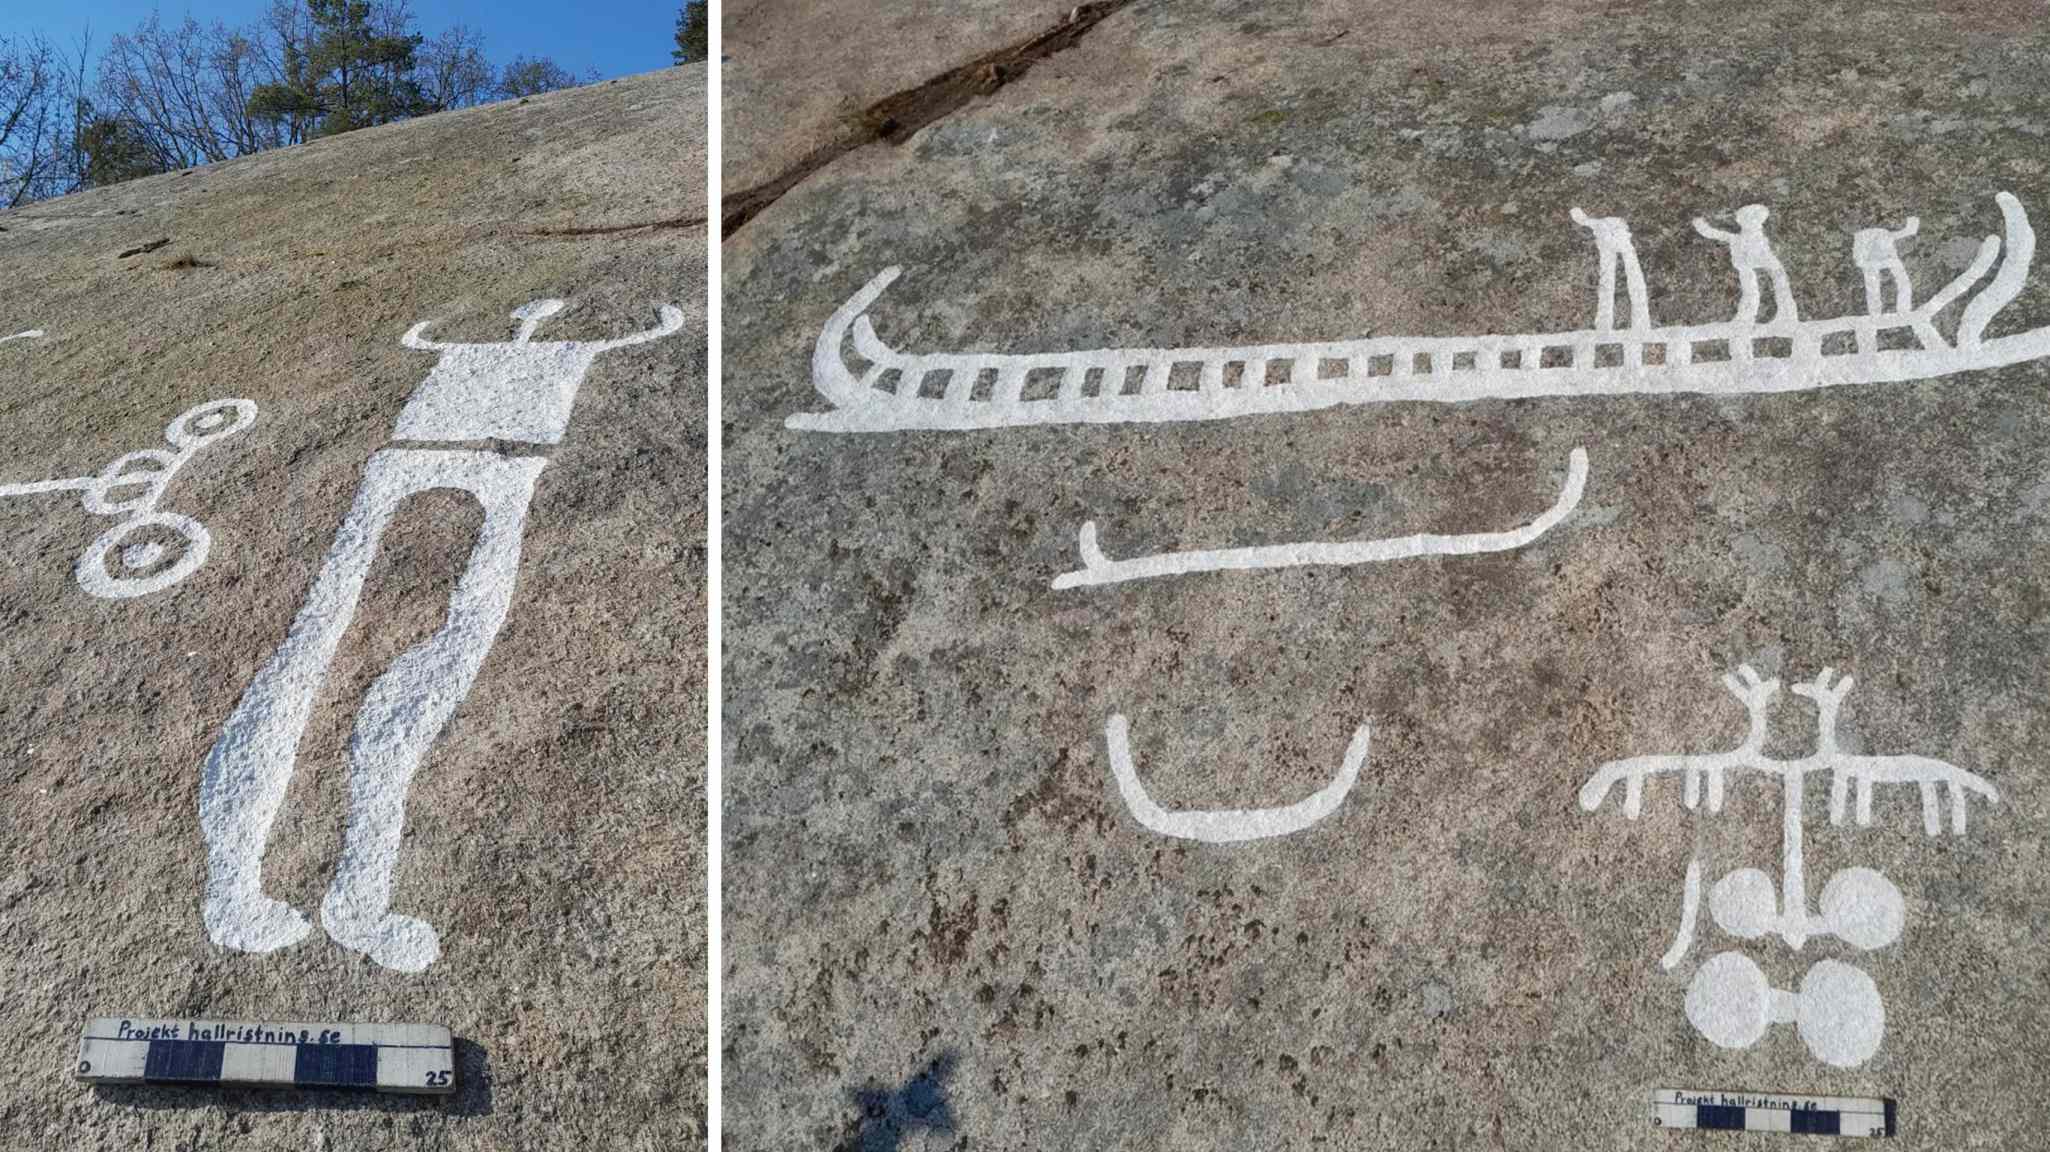 The set of Kville petroglyphs includes 13 ships, nine horses, seven humans, and four chariots.